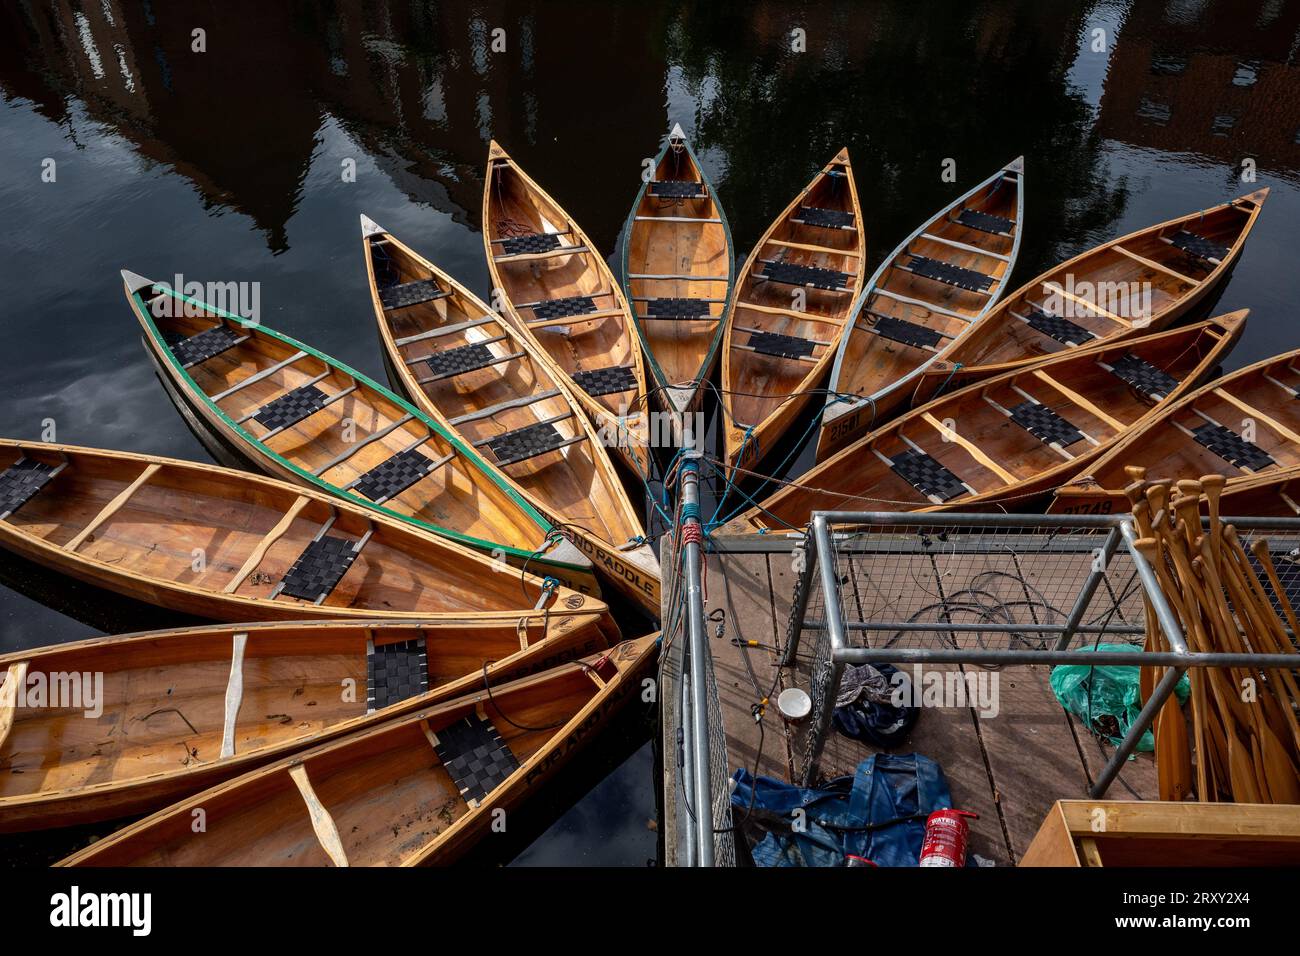 Pub and Paddle Canoes - Norwich Tourism - Canadian Canoes for hire on the River Wensum in Norwich. Pub and Paddle Canoe Hire Norwich. Stock Photo